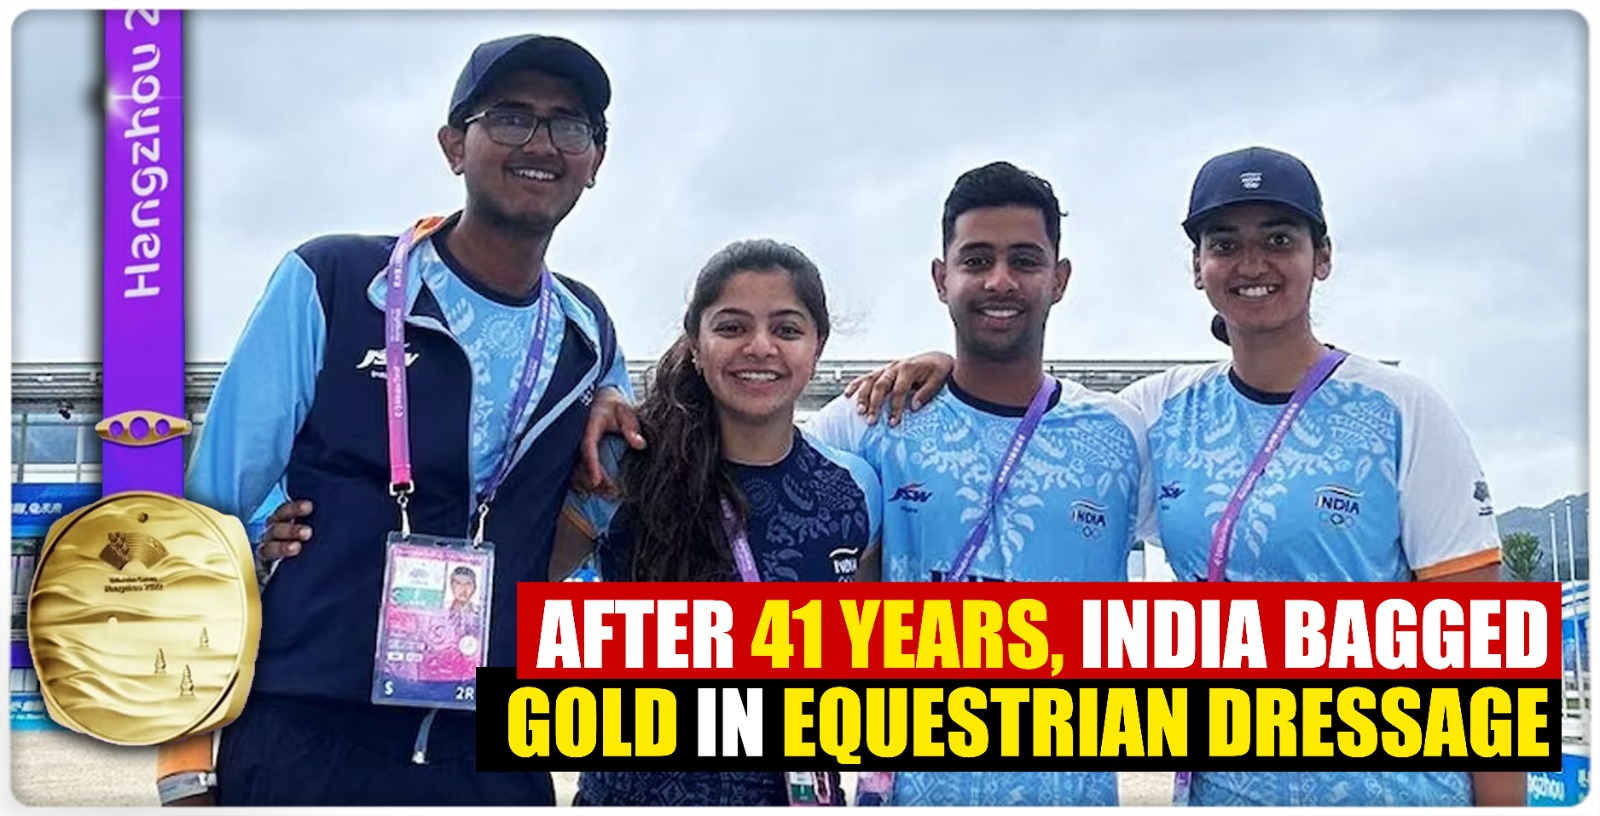 team-india-wins-gold-in-equestrian-dressage-after-41-years